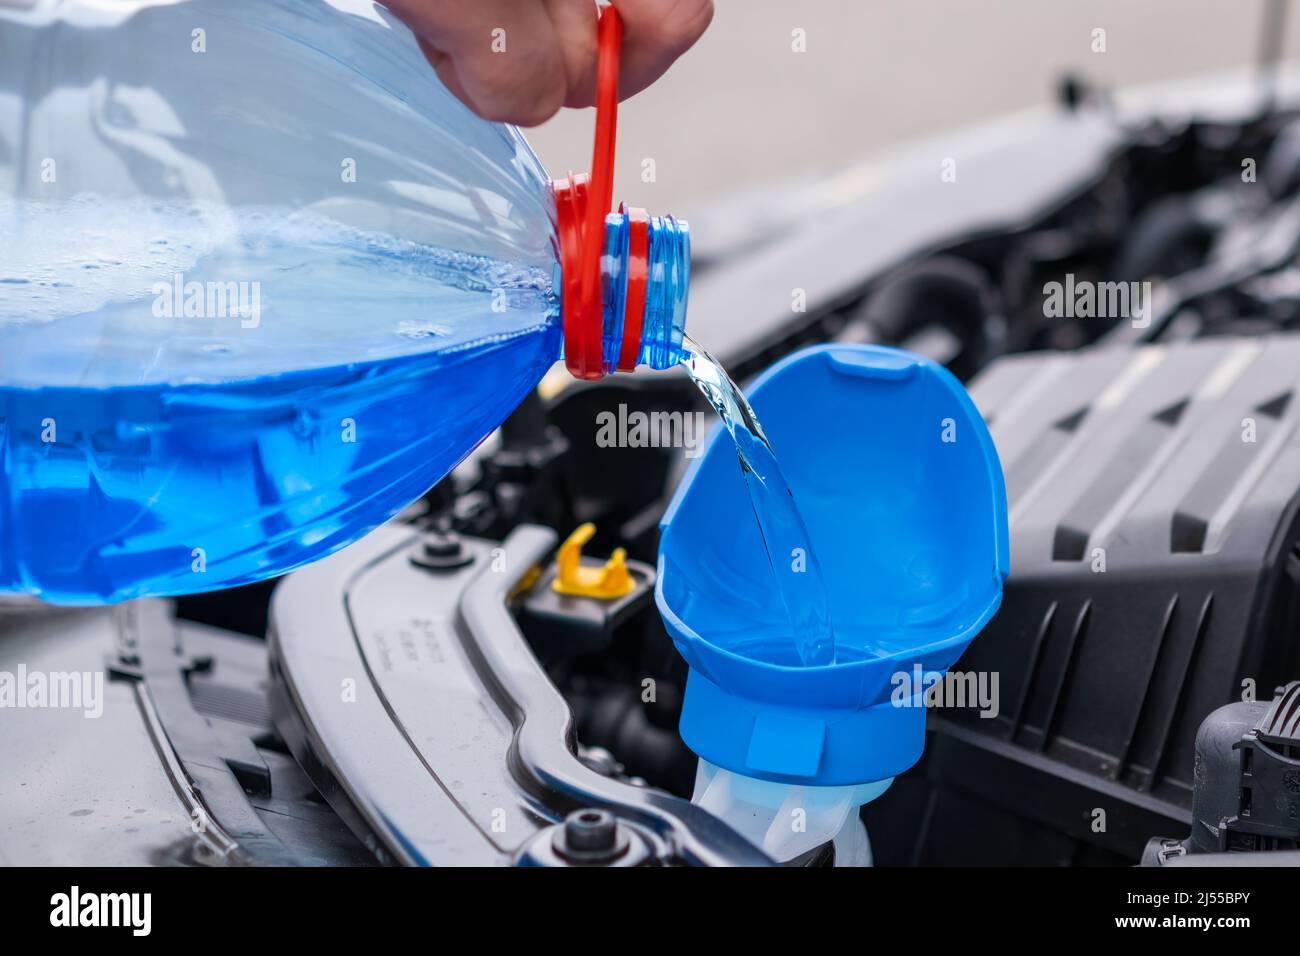 1,756 Windshield Washer Fluid Images, Stock Photos, 3D objects